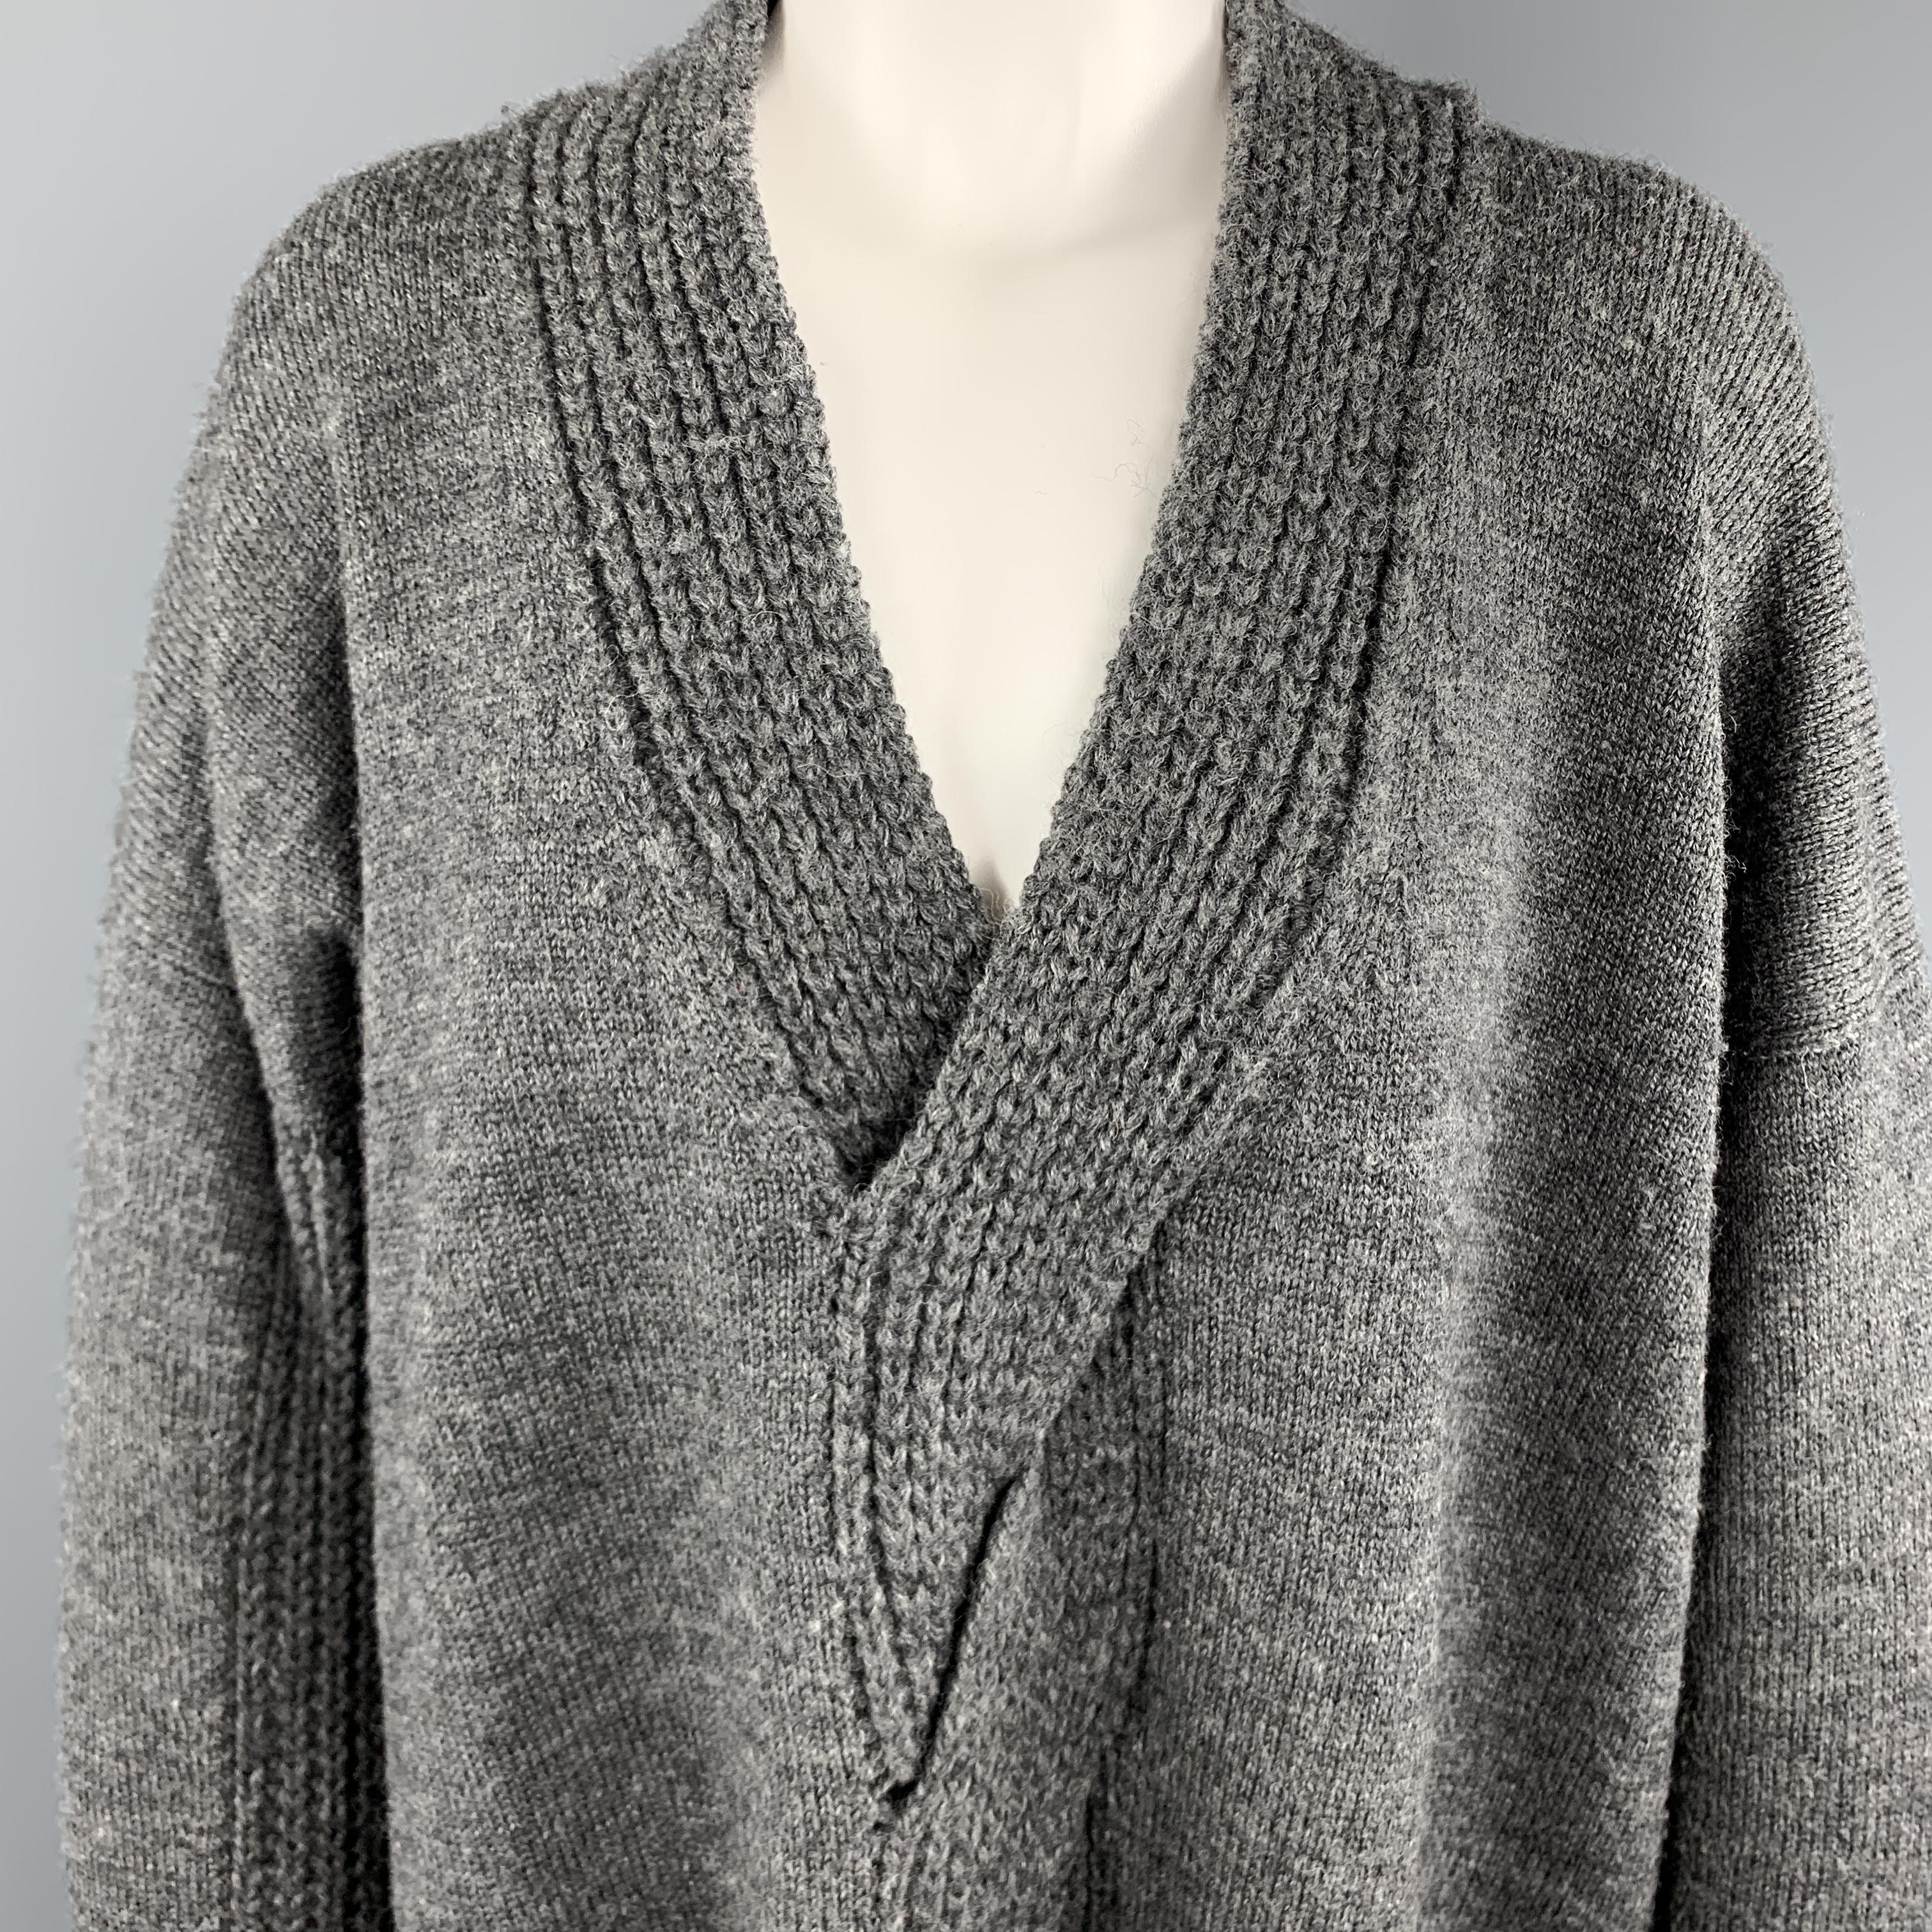 JUNYA WATANABE oversized sweater comes in dark heather gray wol knit with a deep V neck, and woven cutout cable knit center detail. Made in Japan.

Excellent Pre-Owned Condition.
Marked: M

Measurements:

Shoulder: 30 in.
Bust: 50 in.
Sleeve: 21